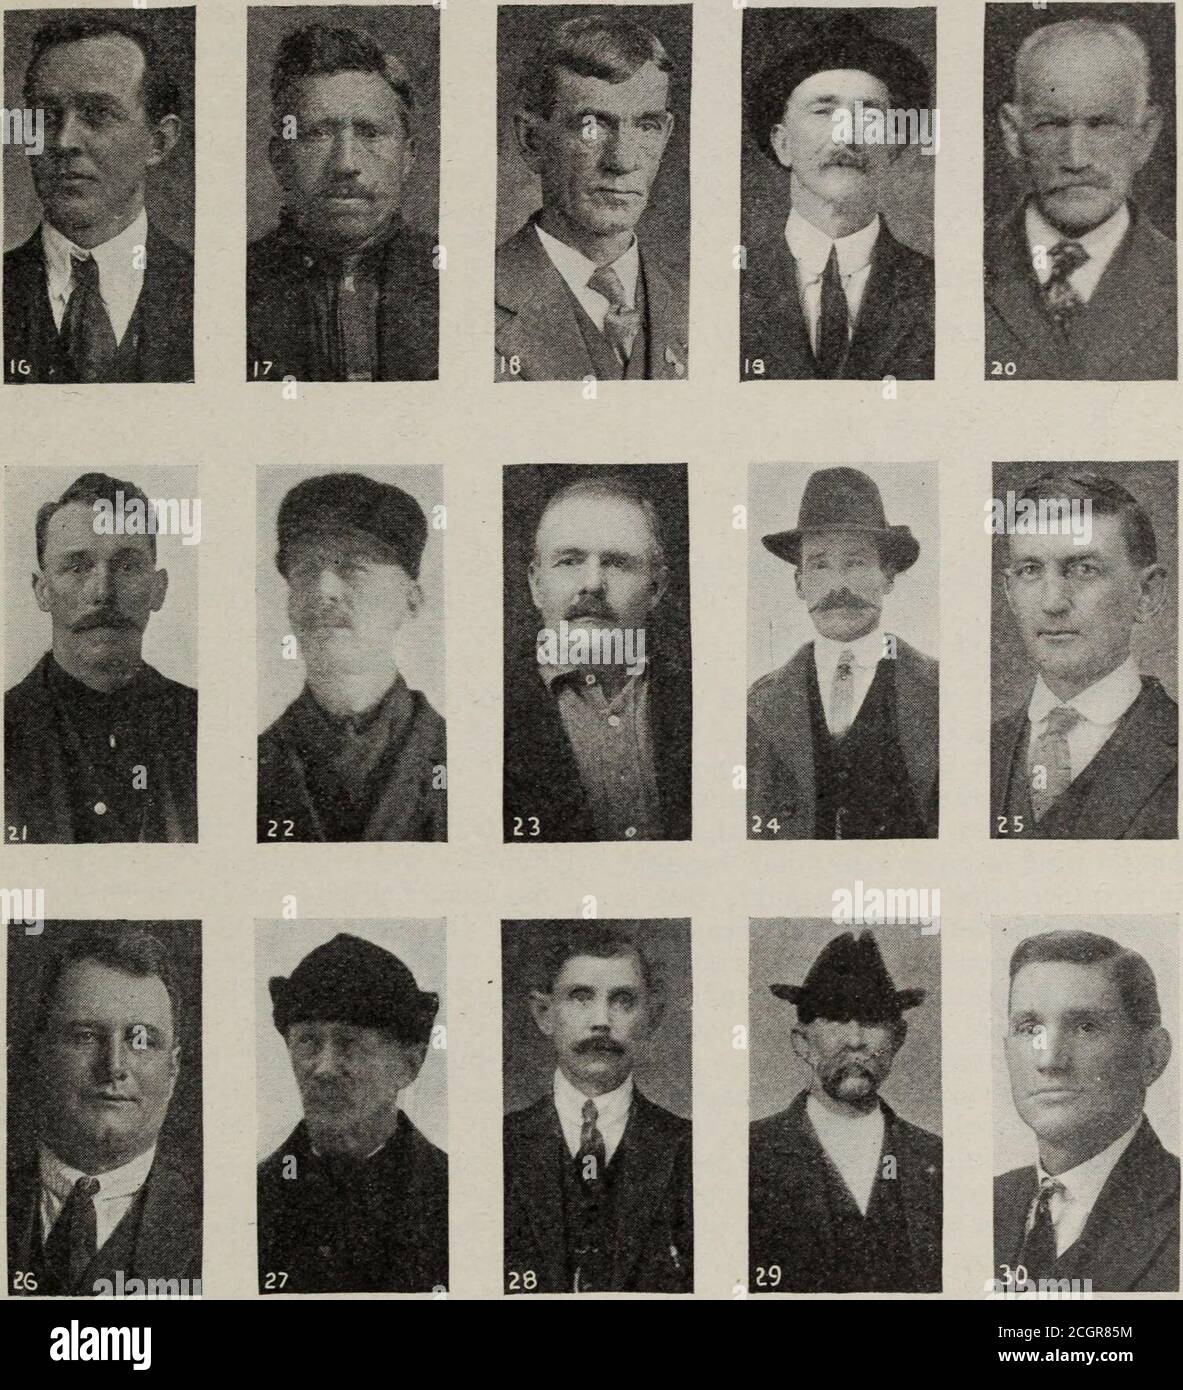 . Baltimore and Ohio employees magazine . TRACK SUPERVISORS AND SECTION FOREMEN TRACK SUPERVISORS HAVING BEST DISTRICTS I— J. R. M.u.onk, Philadelphia Division. 2—W. G. Beall, Baltimore Division. 3—James Ci.ay, CuinherlantlDiviwon. 4—L. T. Wir.FONo, IfODODgah Division. 5—W. 0. Wright, Wheeling Division. 6—G. M. Bryan, OhioRiver Di vi.-Jon. 7—L. C. Swanhov, Cleveland Division. 8—W. T. Metzoer, Conncllsville Division. 0—G. H.BfMMS, Iif f nburgh Division. 10 -G. W. Huffman, New Castle Division. FOREMEN HAVING BEST MAIN LINE SECTION II— F. L. H wtWAito, Beloamp, Md., Philadelphia Division. 12—W. E Stock Photo